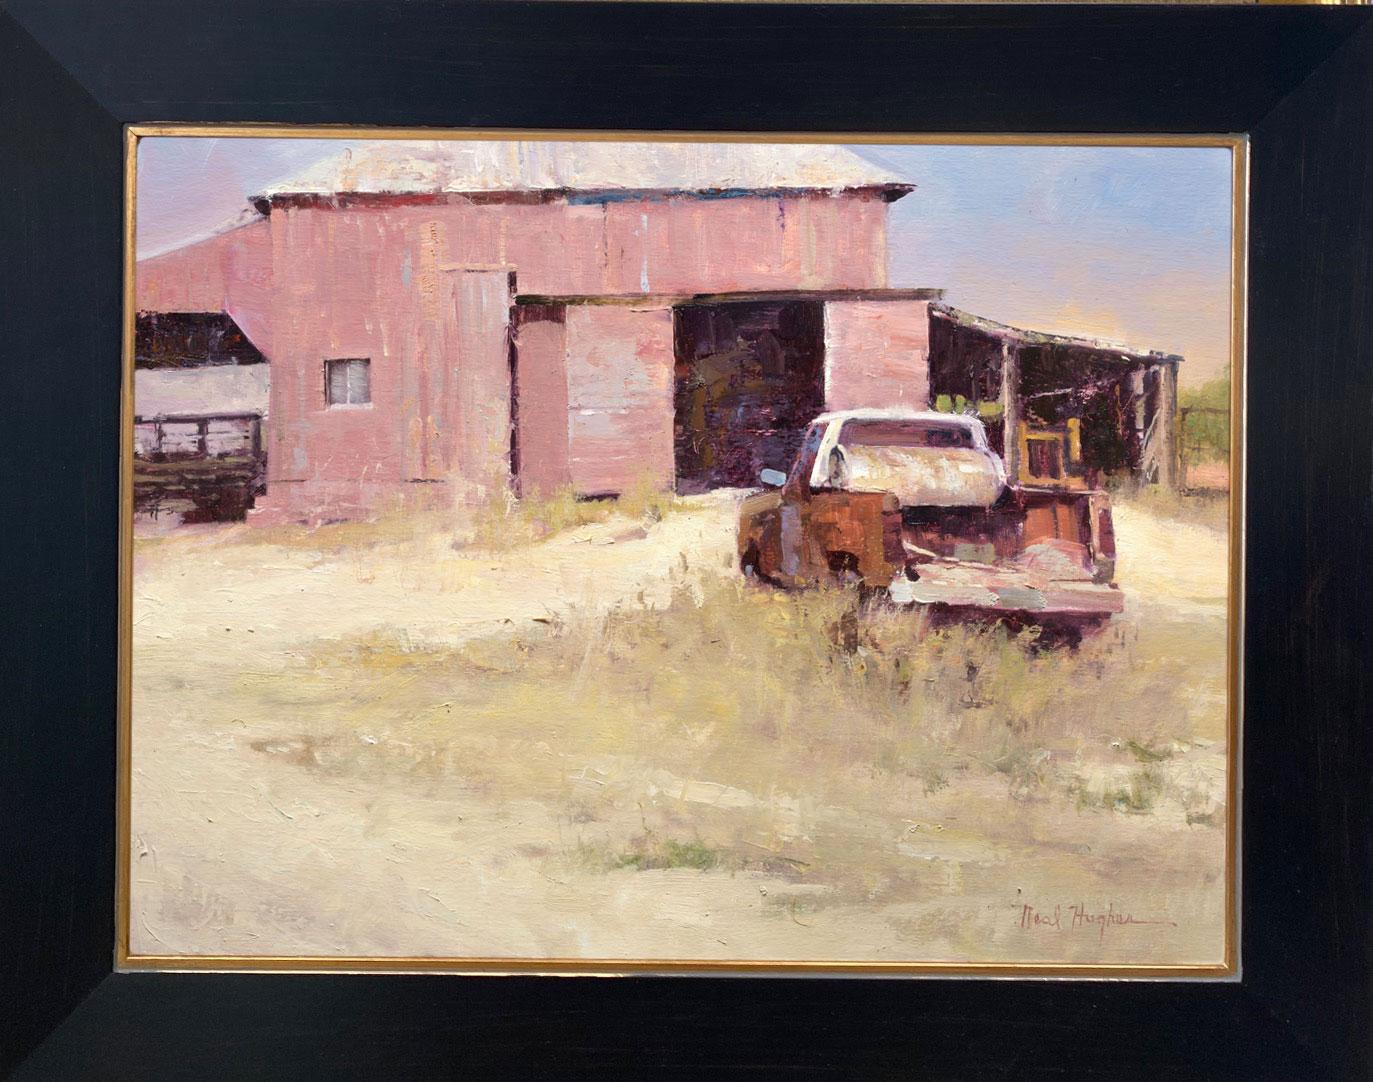 Mims Truck, original realist American countryside landscape - Painting by Neal Hughes